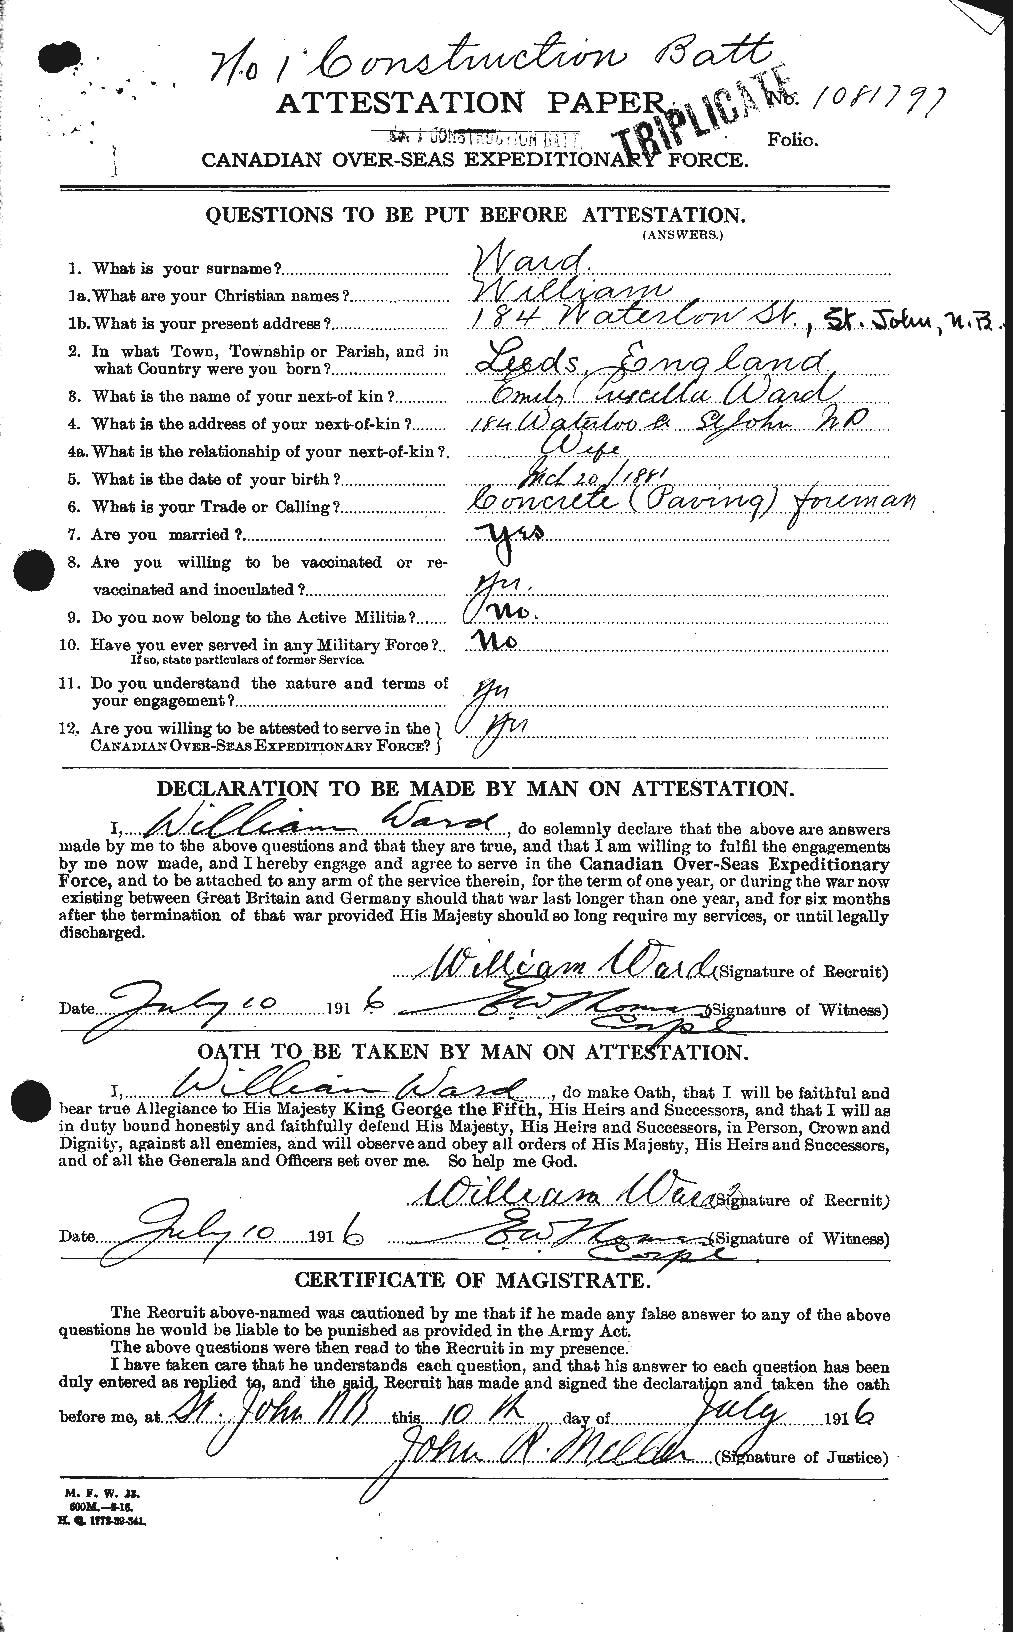 Personnel Records of the First World War - CEF 659777a